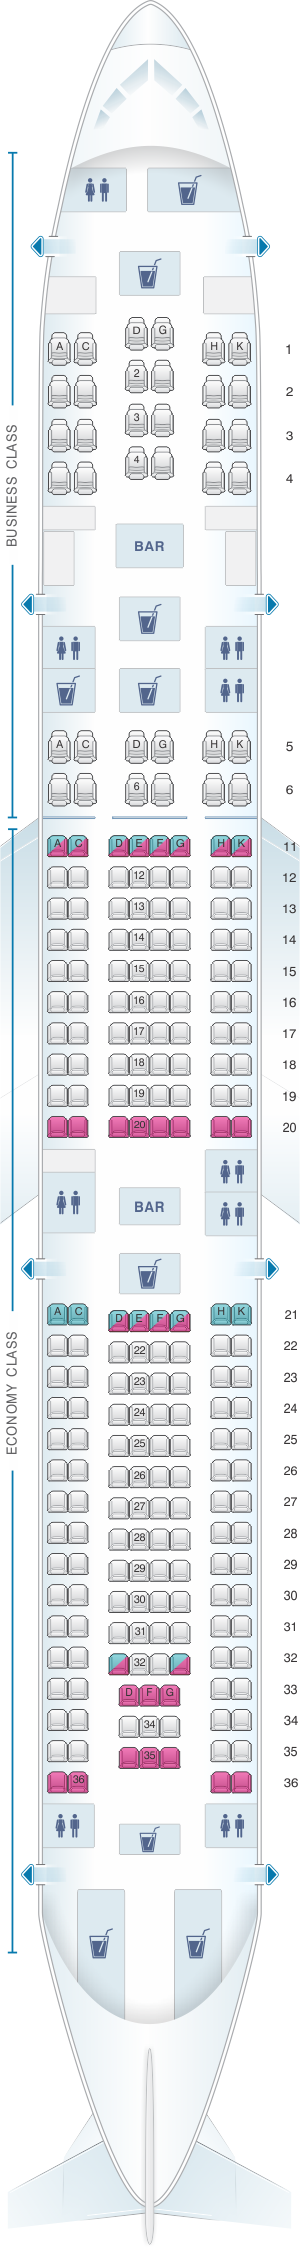 Seat map for Hi Fly Airbus A340 500 TFX/TFW 237pax